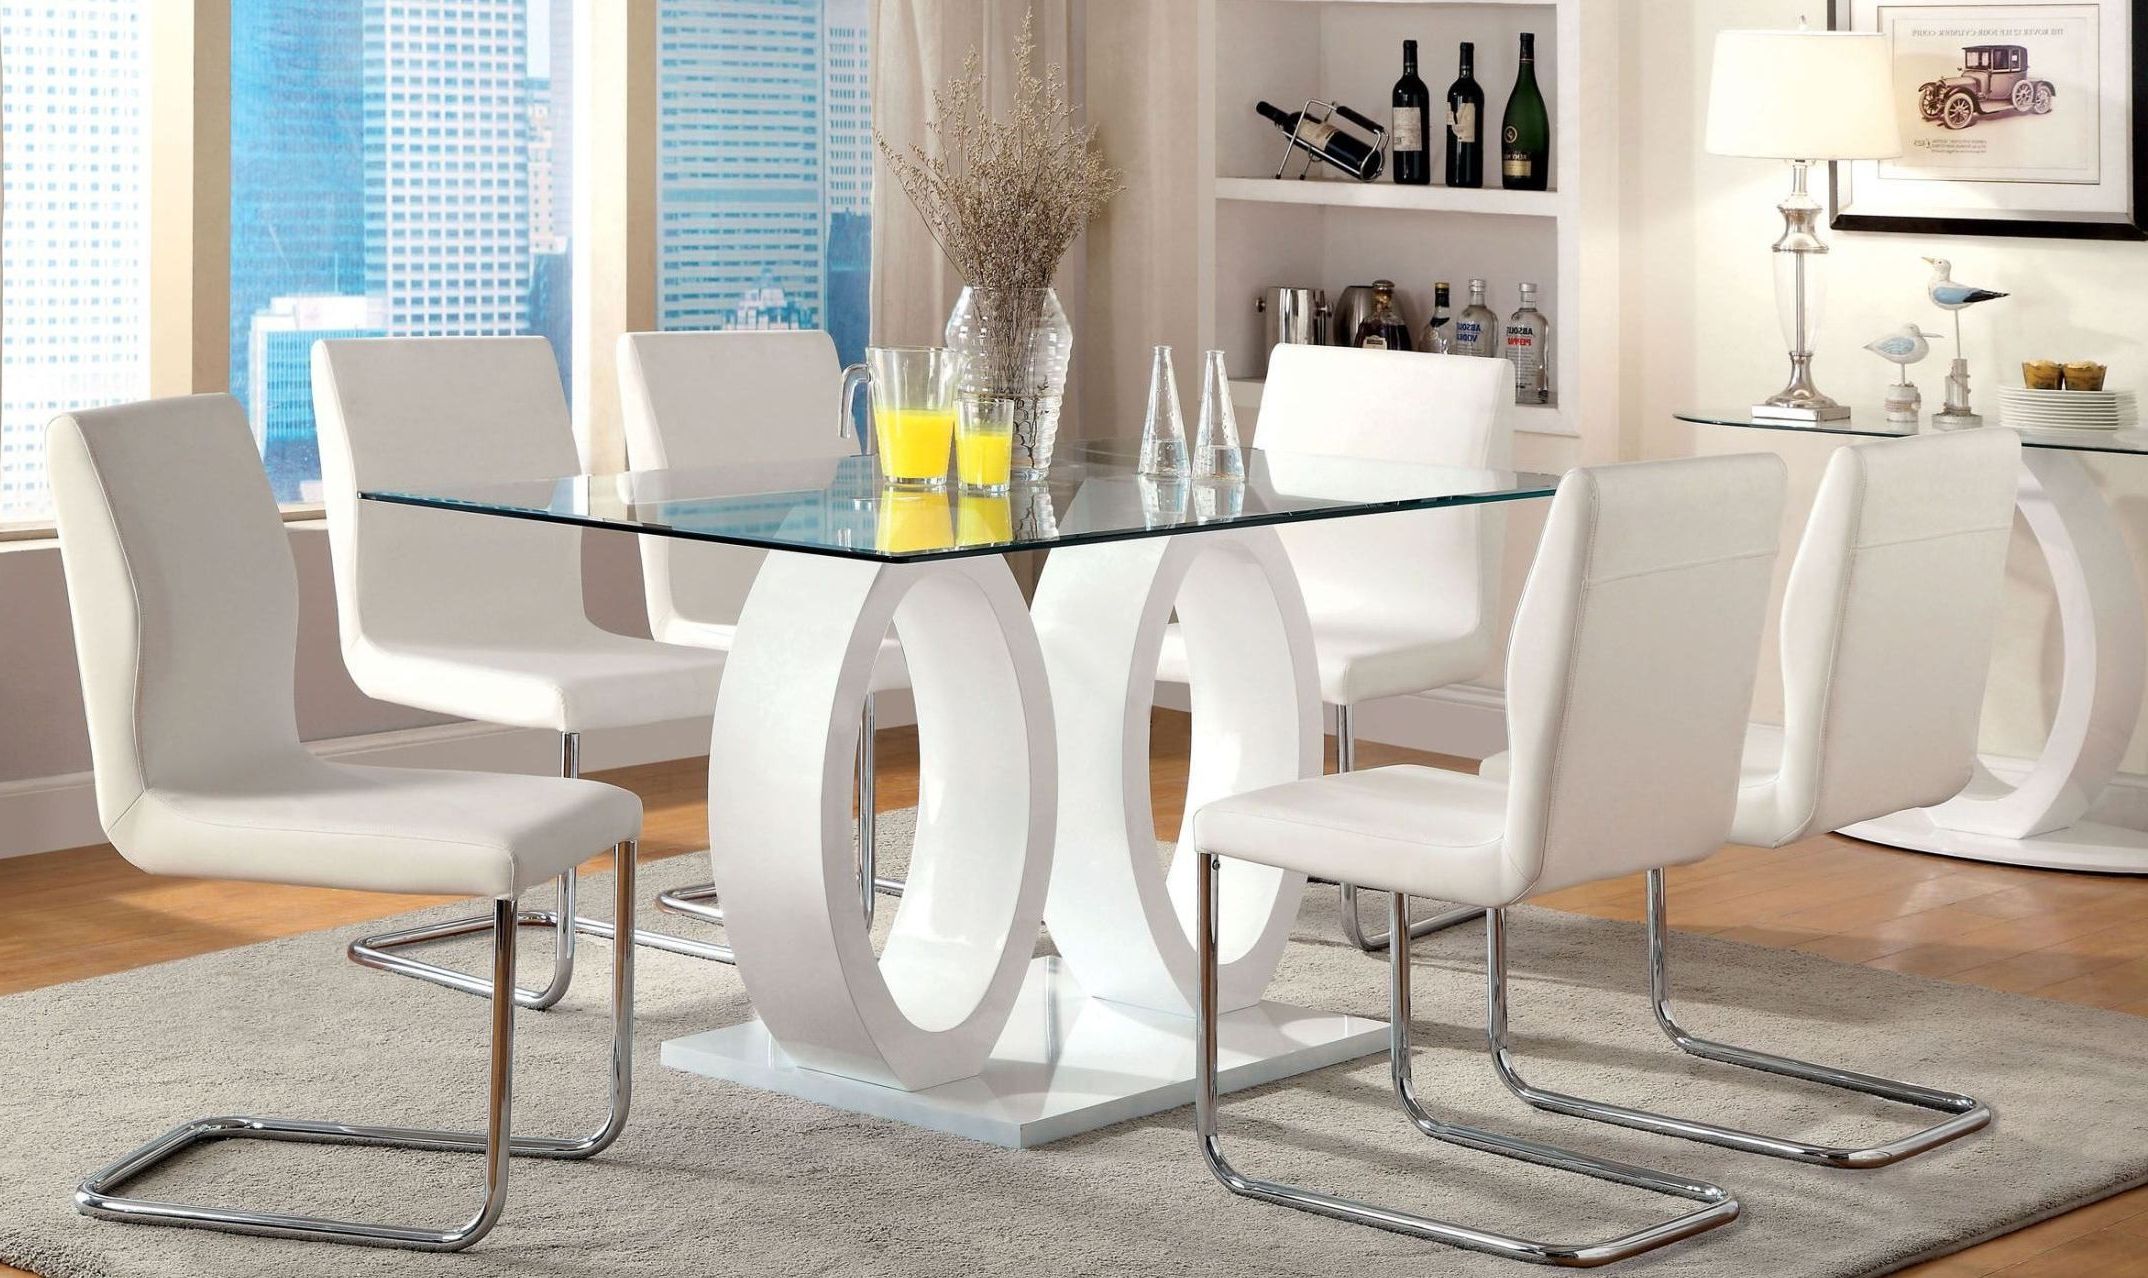 2020 Lodia I White Glass Top Rectangular Pedestal Dining Room Intended For White Rectangular Dining Tables (View 12 of 20)